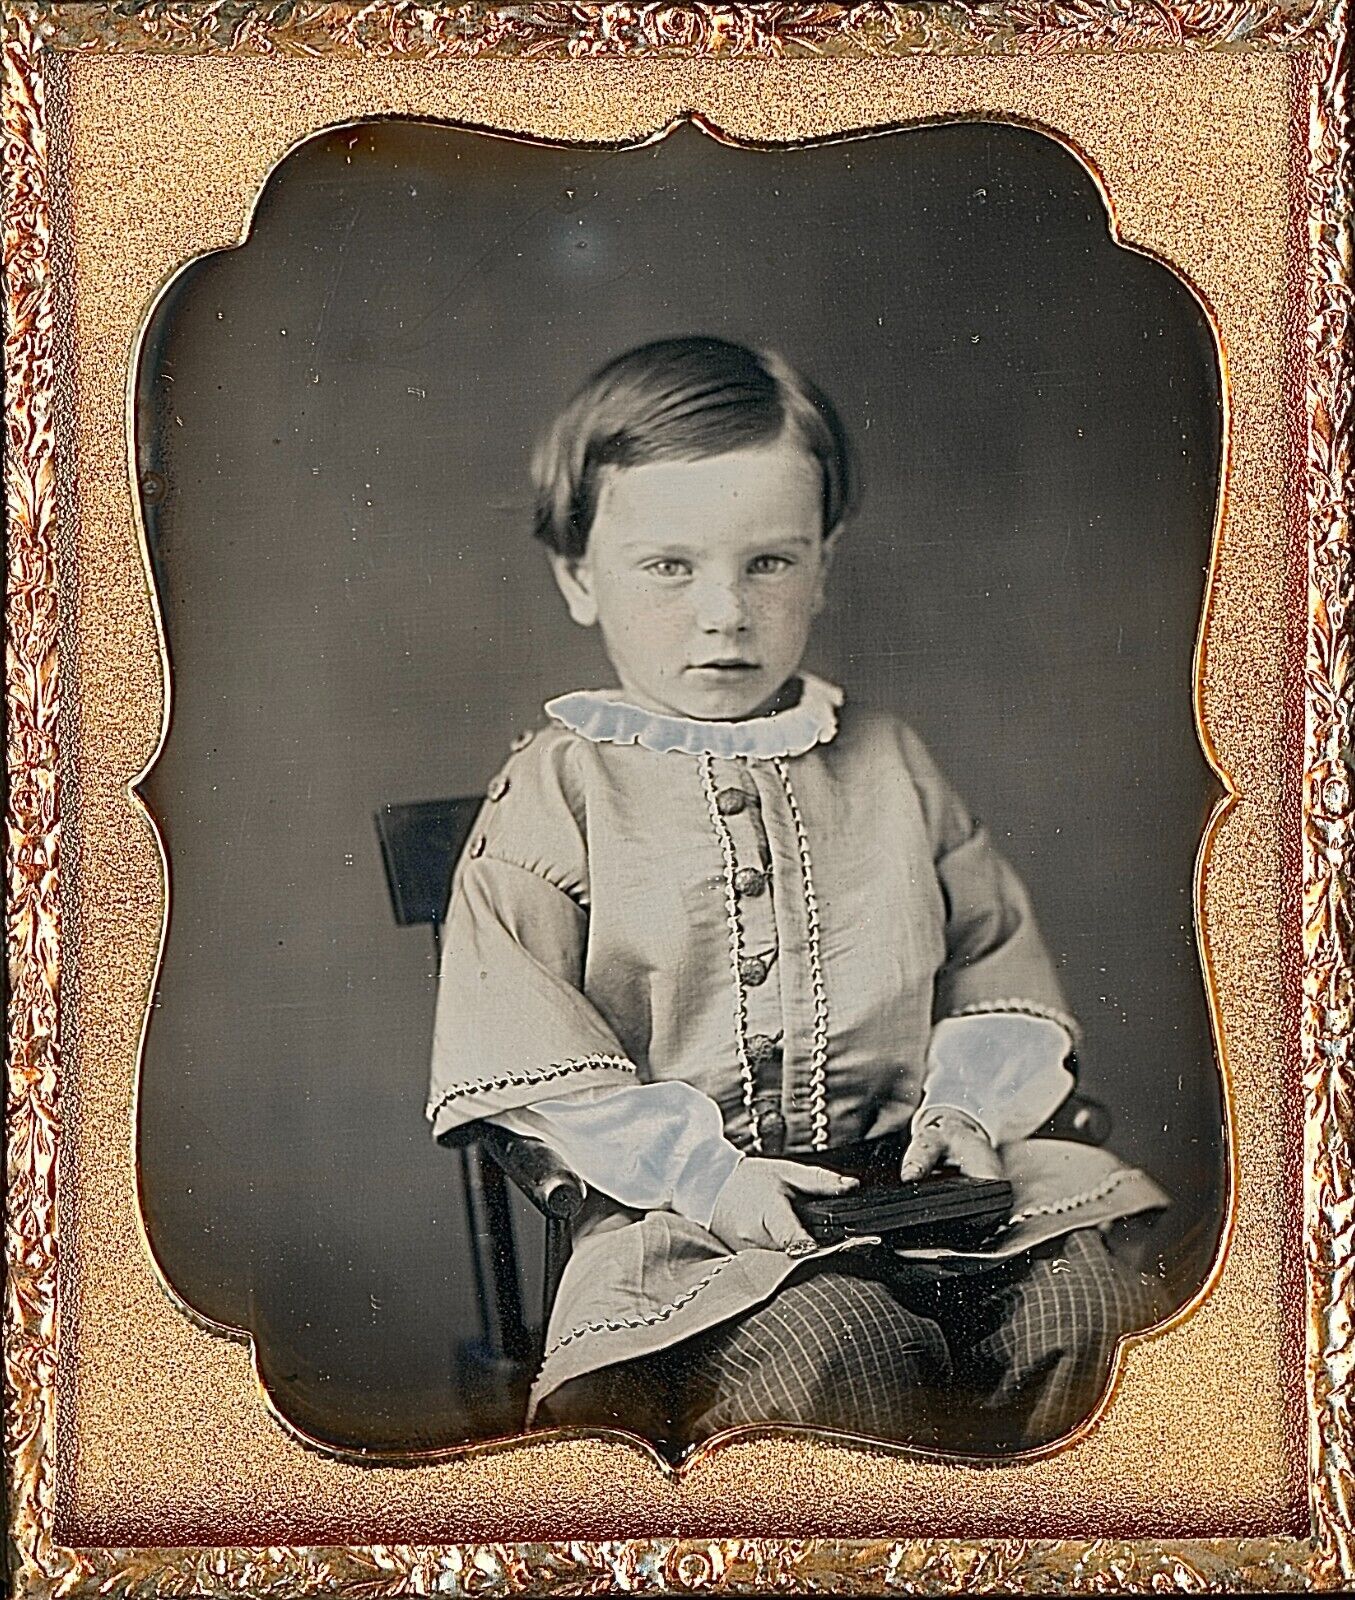 Adorable Young Boy Freckles Holding Case Identified 1/6 Plate Daguerreotype T275